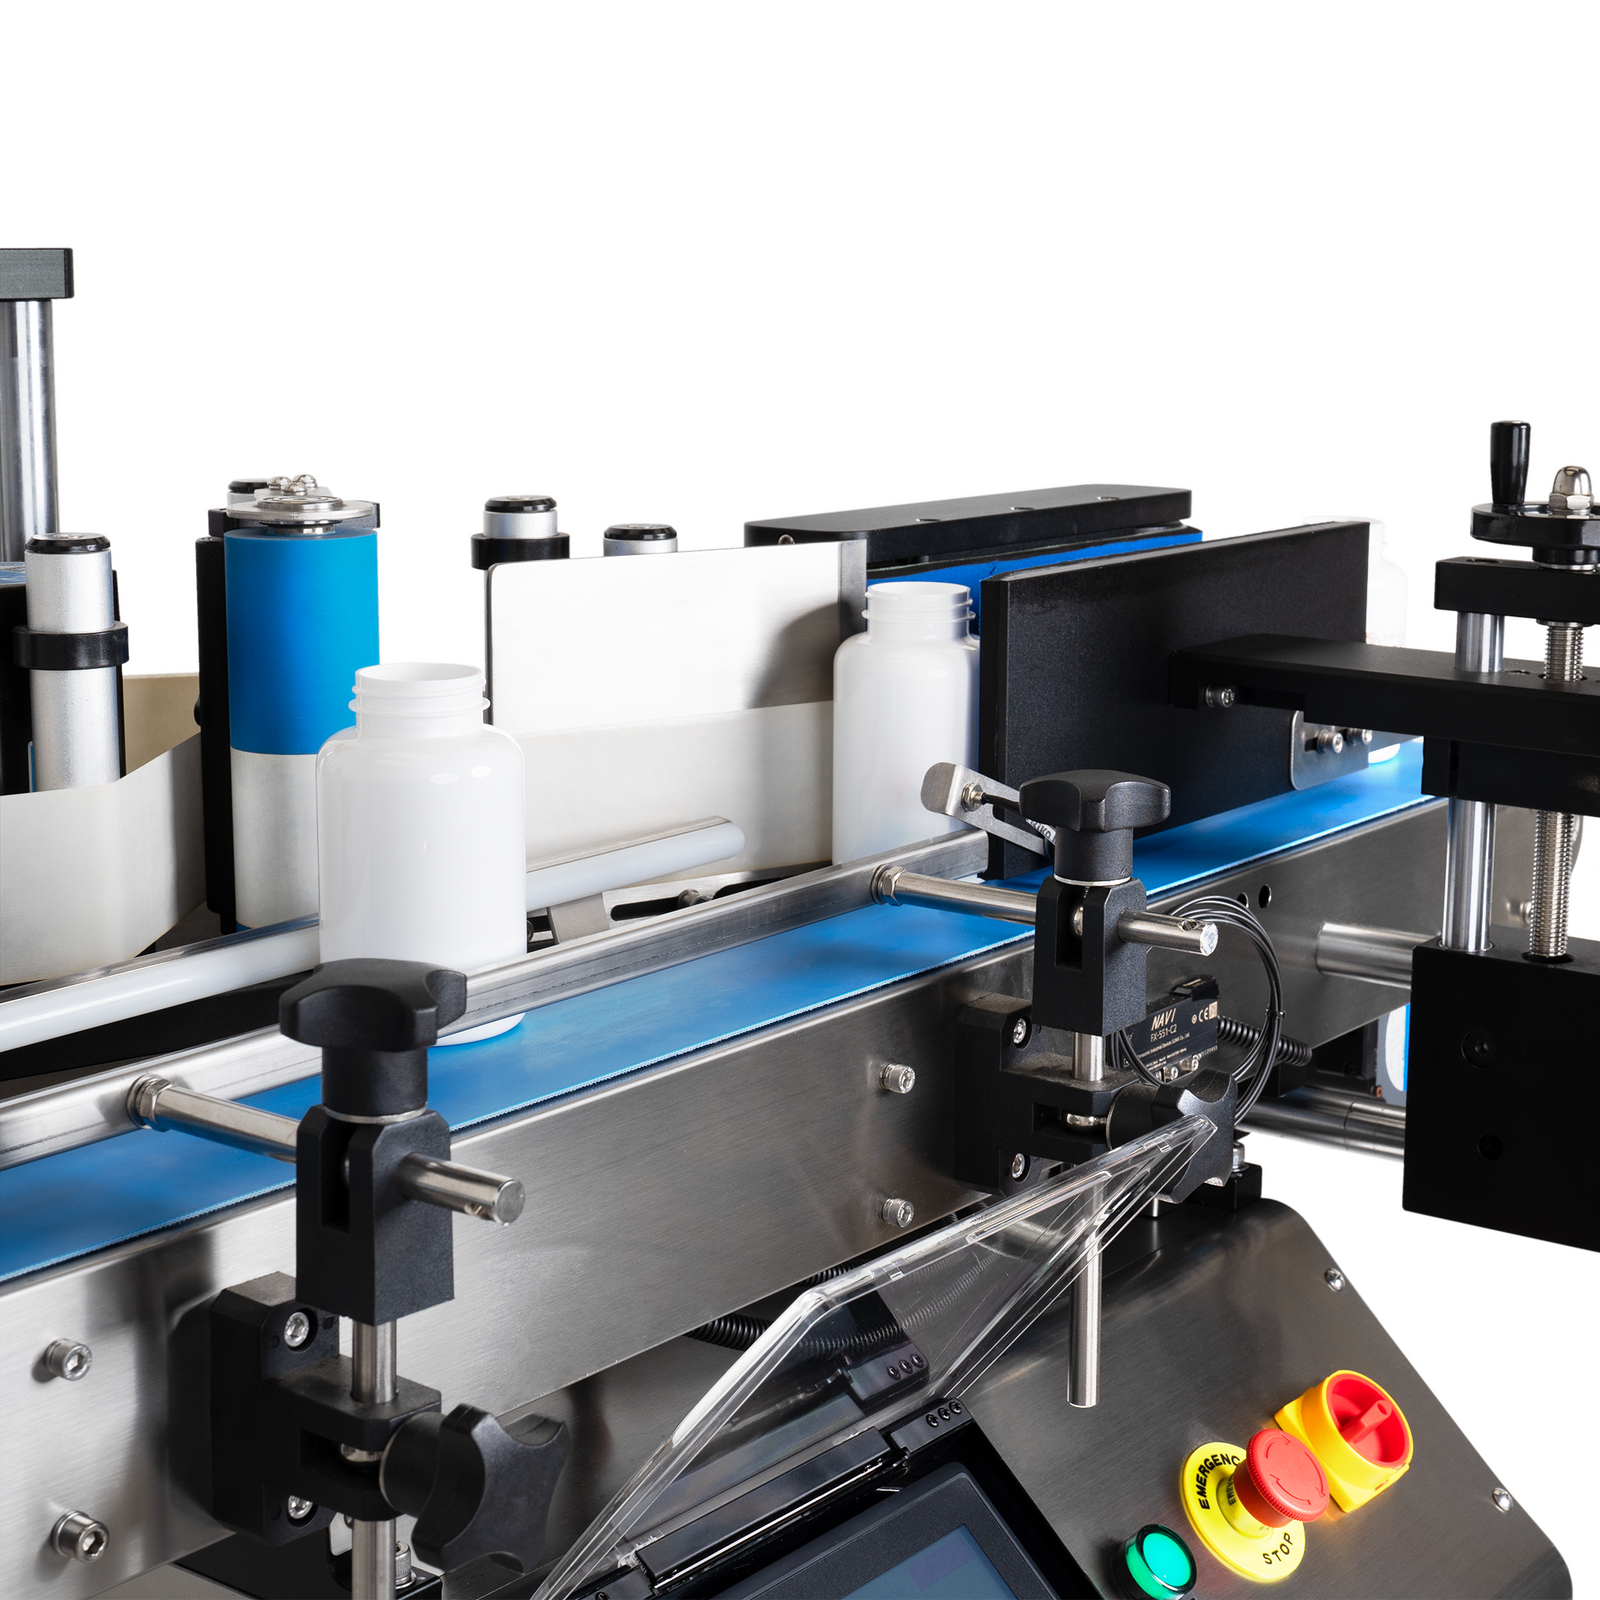 OMICRON 3 Automatic Labeler System - Pressure Sensitive Label Applicator  for Flat Containers – Technopack Corporation